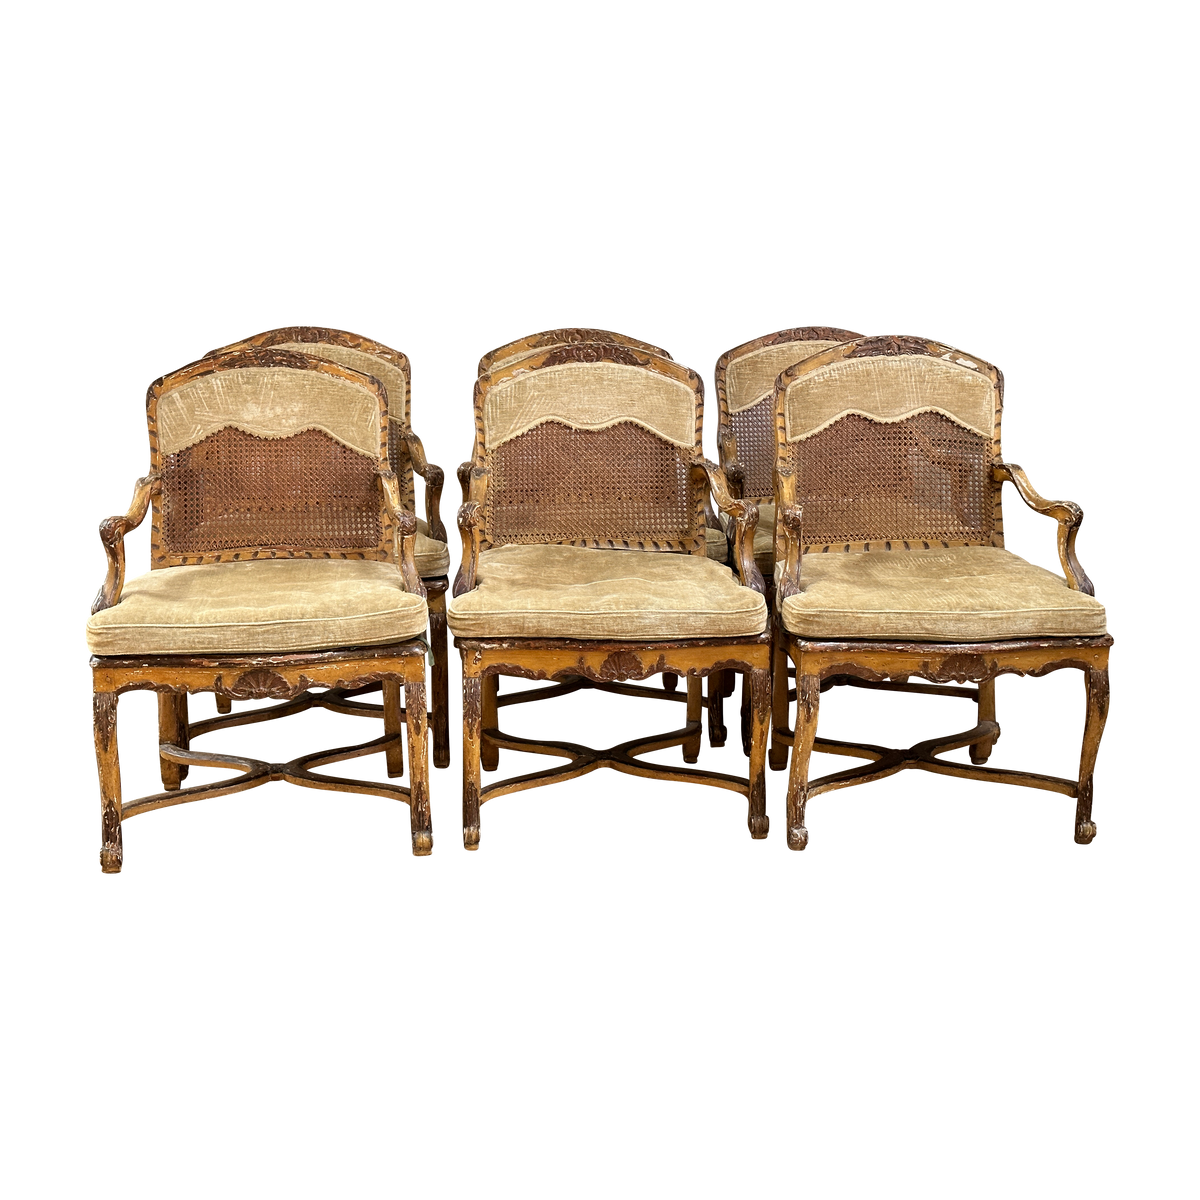 Rare Set of Six 18th Century Venetian Armchairs with original paint - On Hold